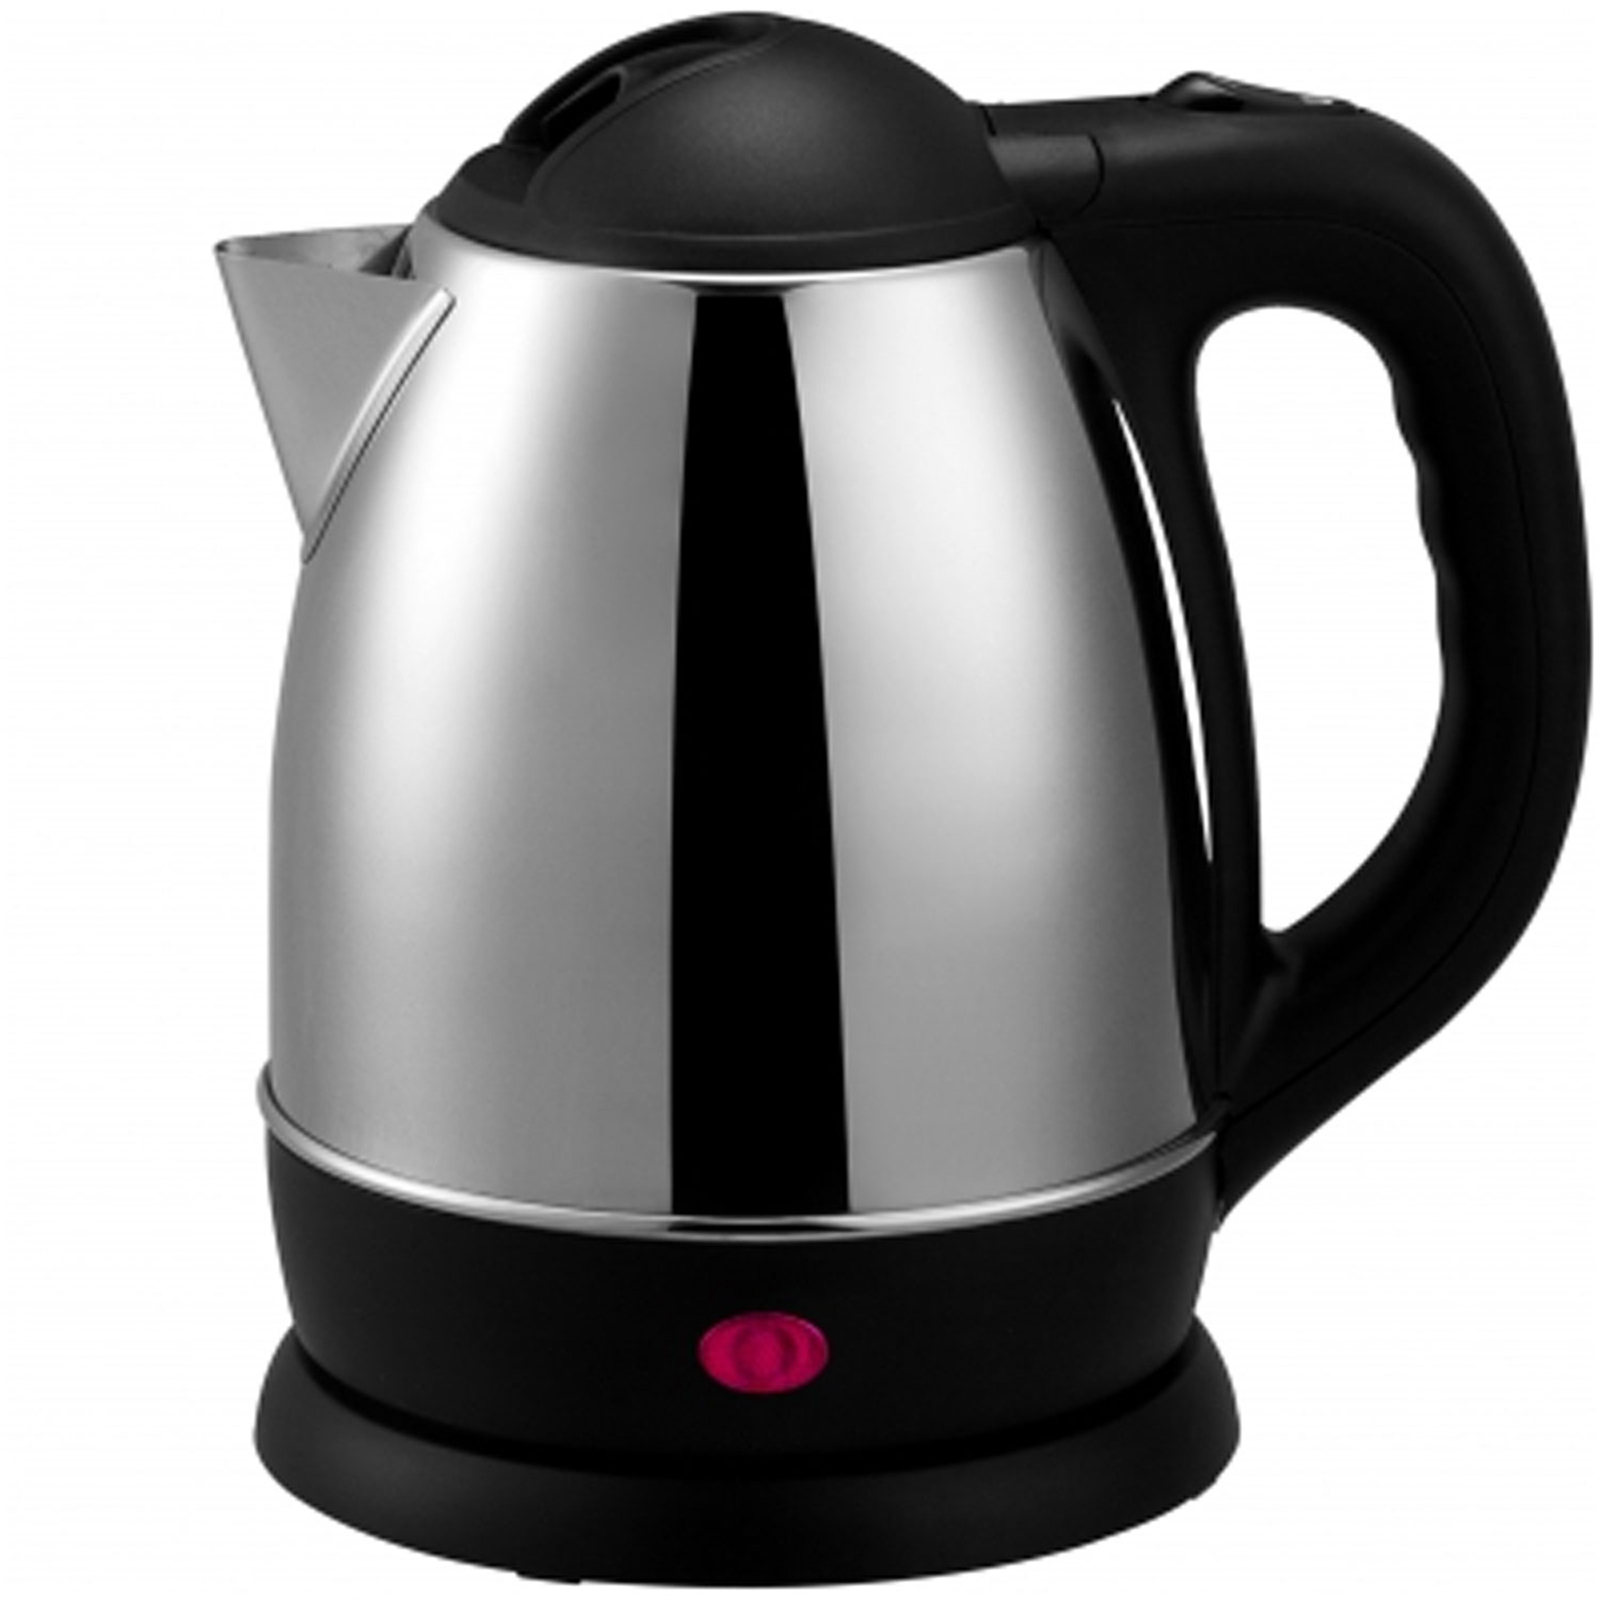 Brentwood Appliances KT-1770 Stainless 1.2-liter Electric Tea Kettle